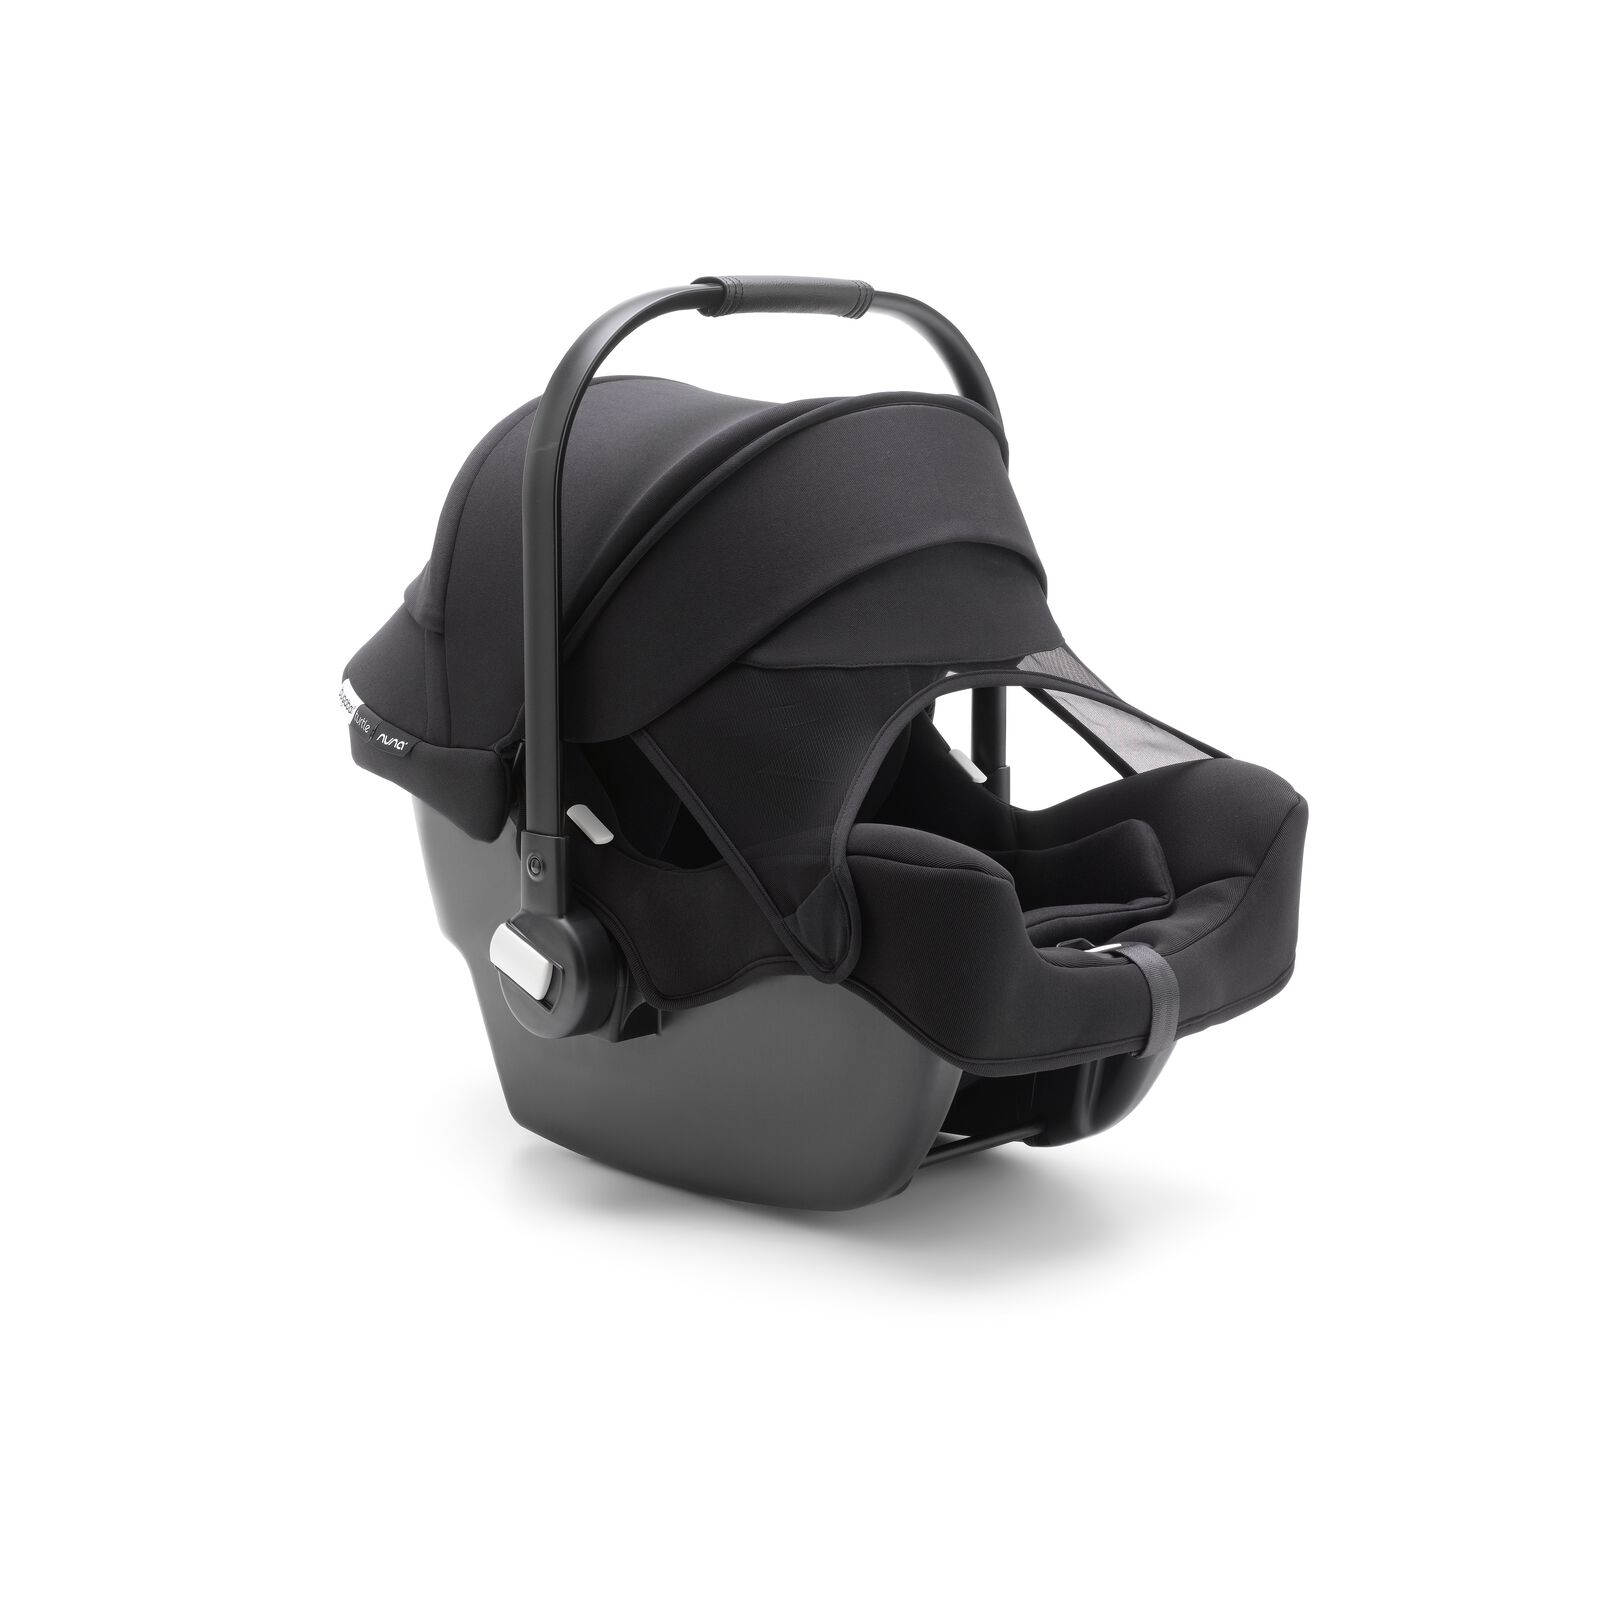 Bugaboo Turtle by Nuna baby capsule with Isofix base - View 4